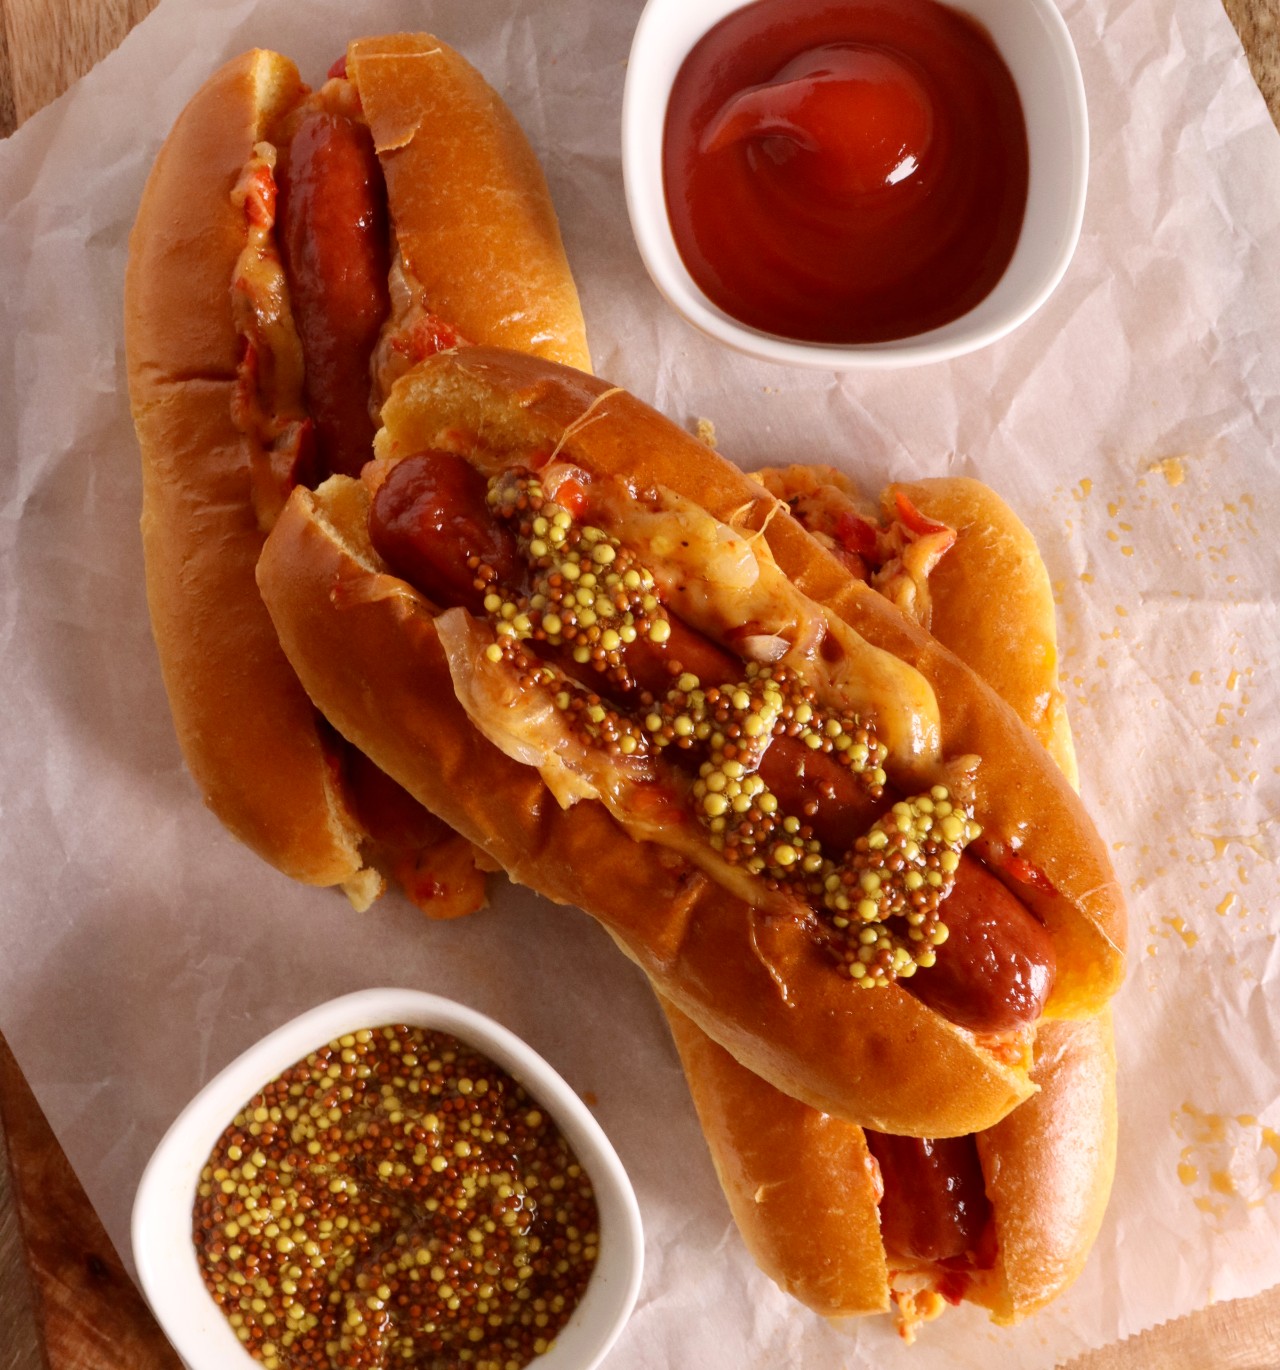 4 Ways to Make a Perfect Hot Dog